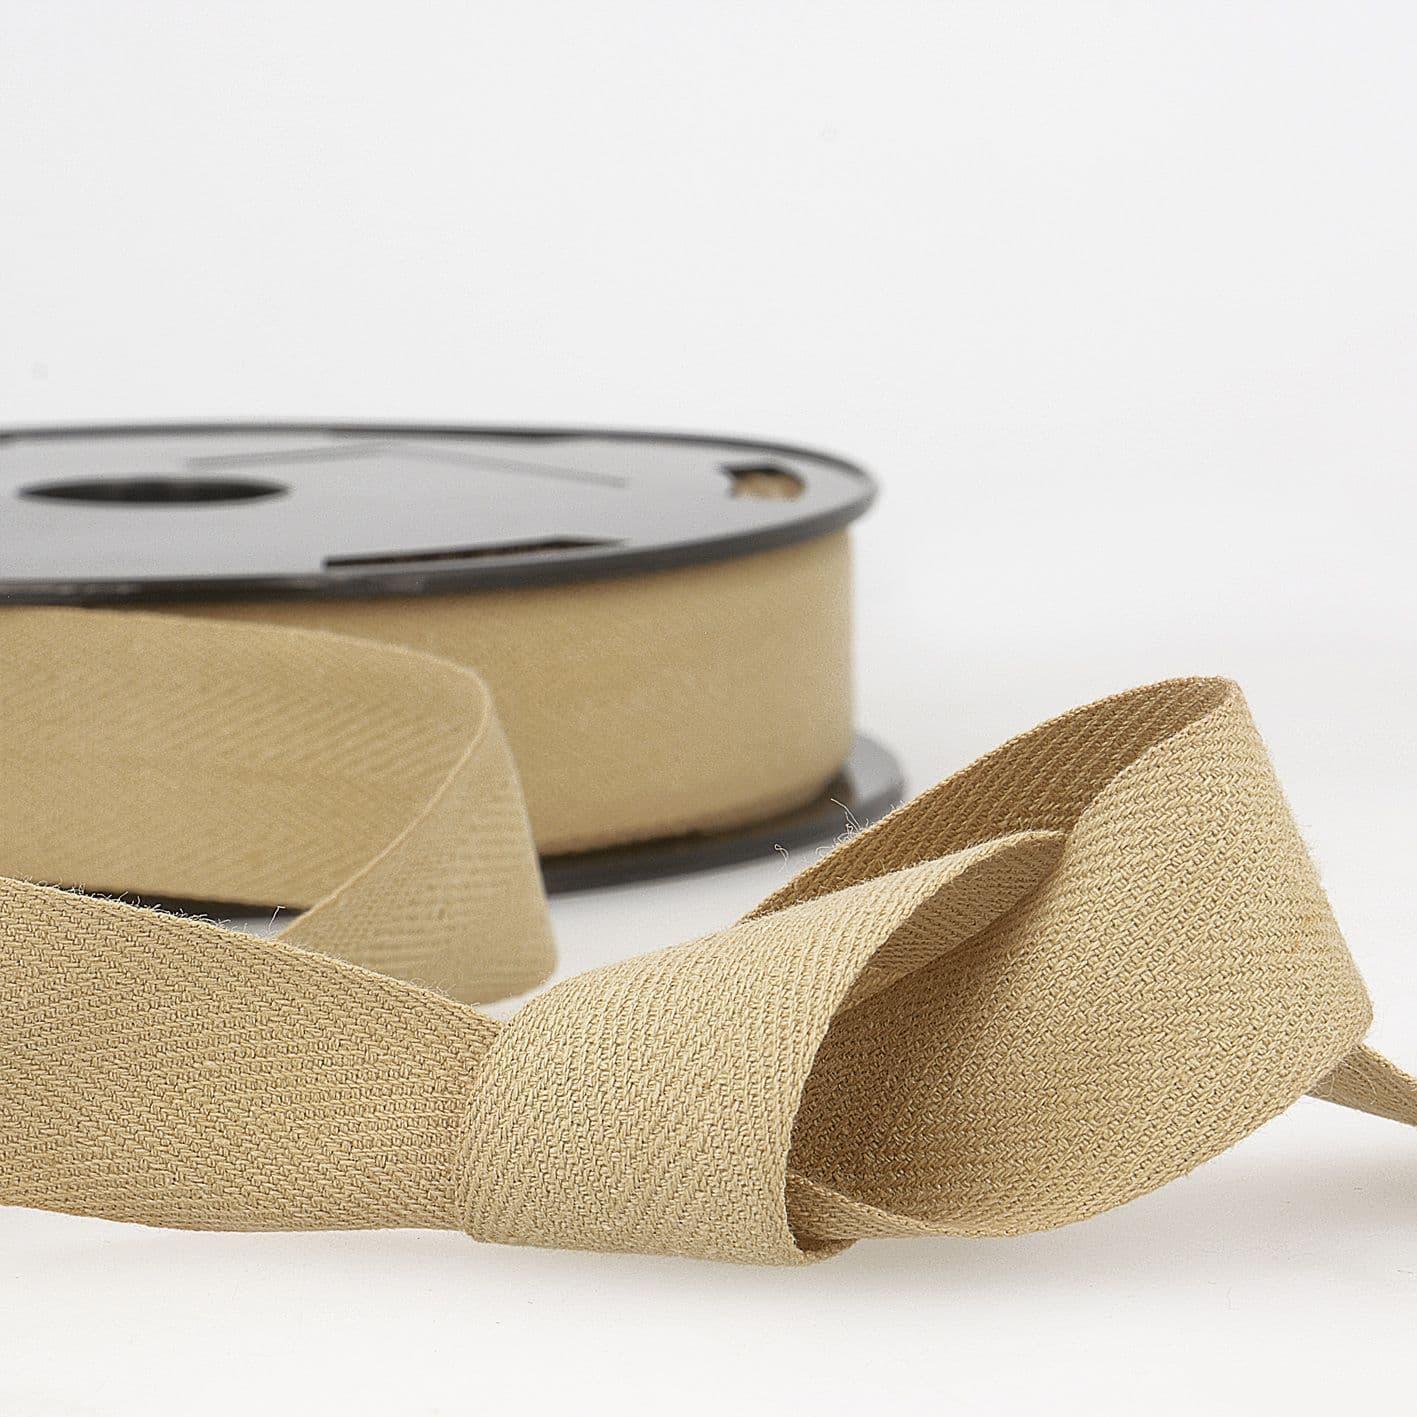 Bond Narrow Fabrics has the line of Twill tapes & more to fit your needs